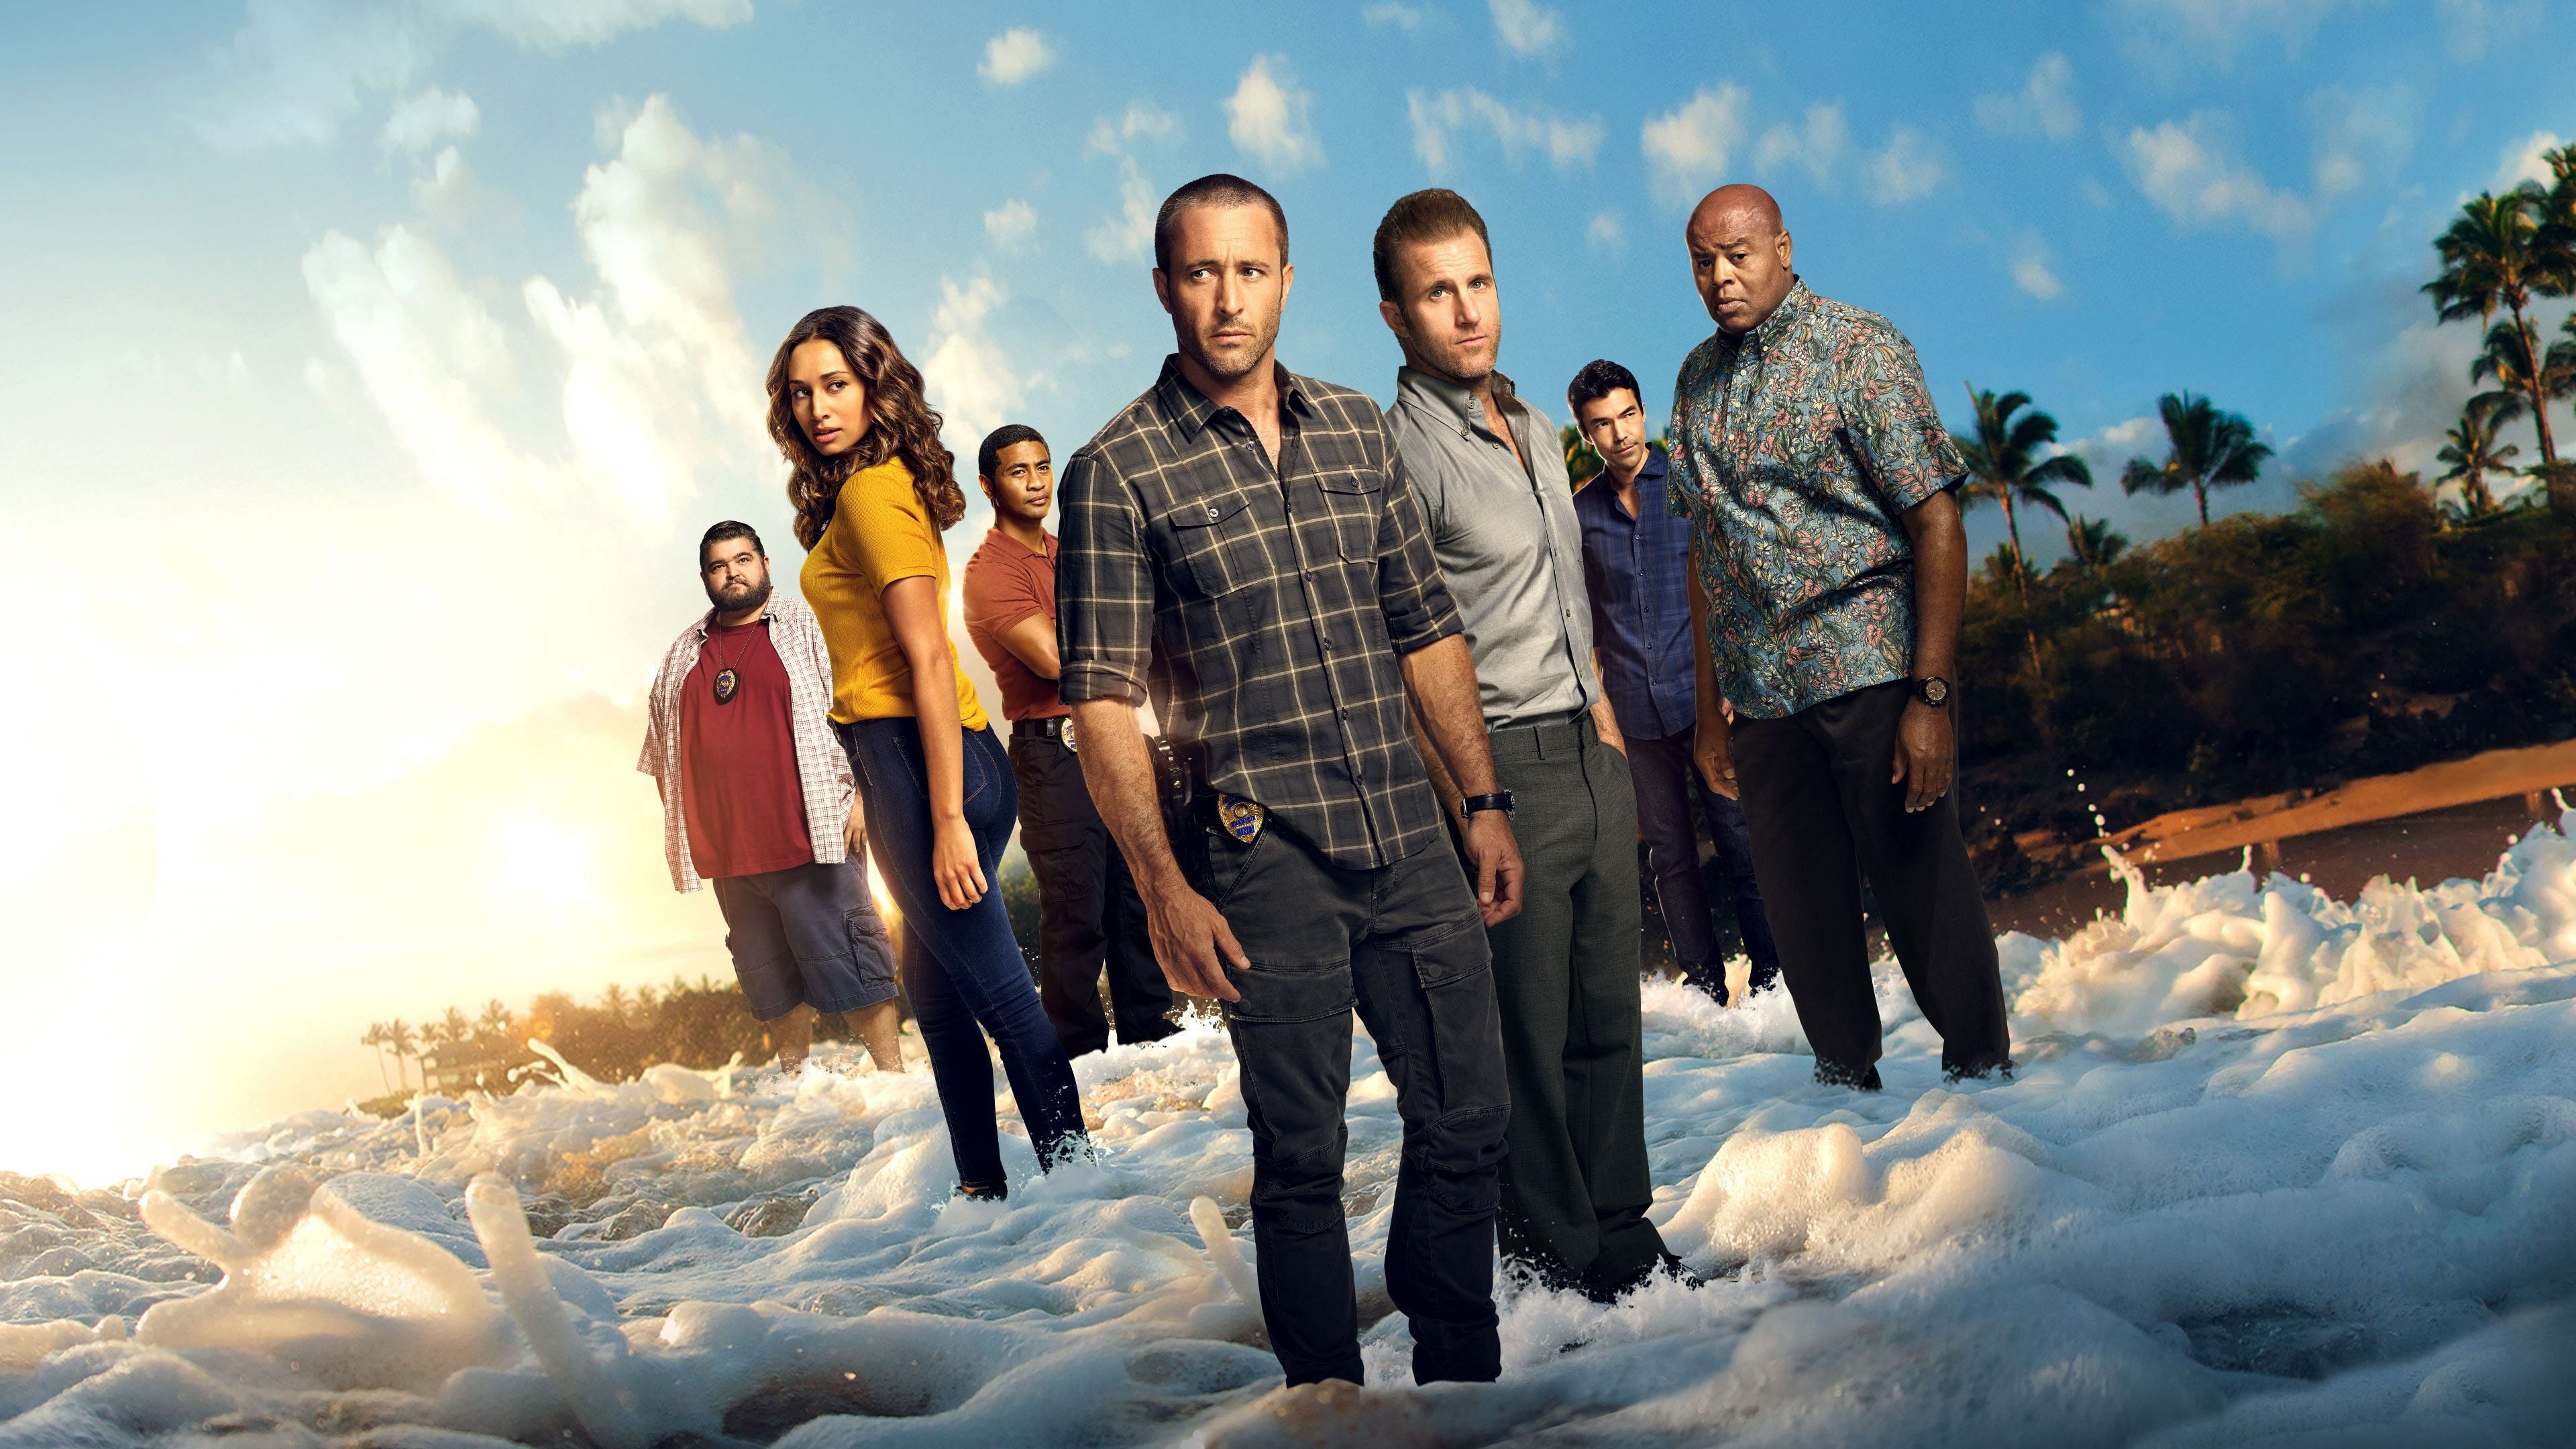 Crime-solving in paradise, Hawaii Five-0 TV series, Action-packed episodes, Tropical backdrop, 3840x2160 4K Desktop